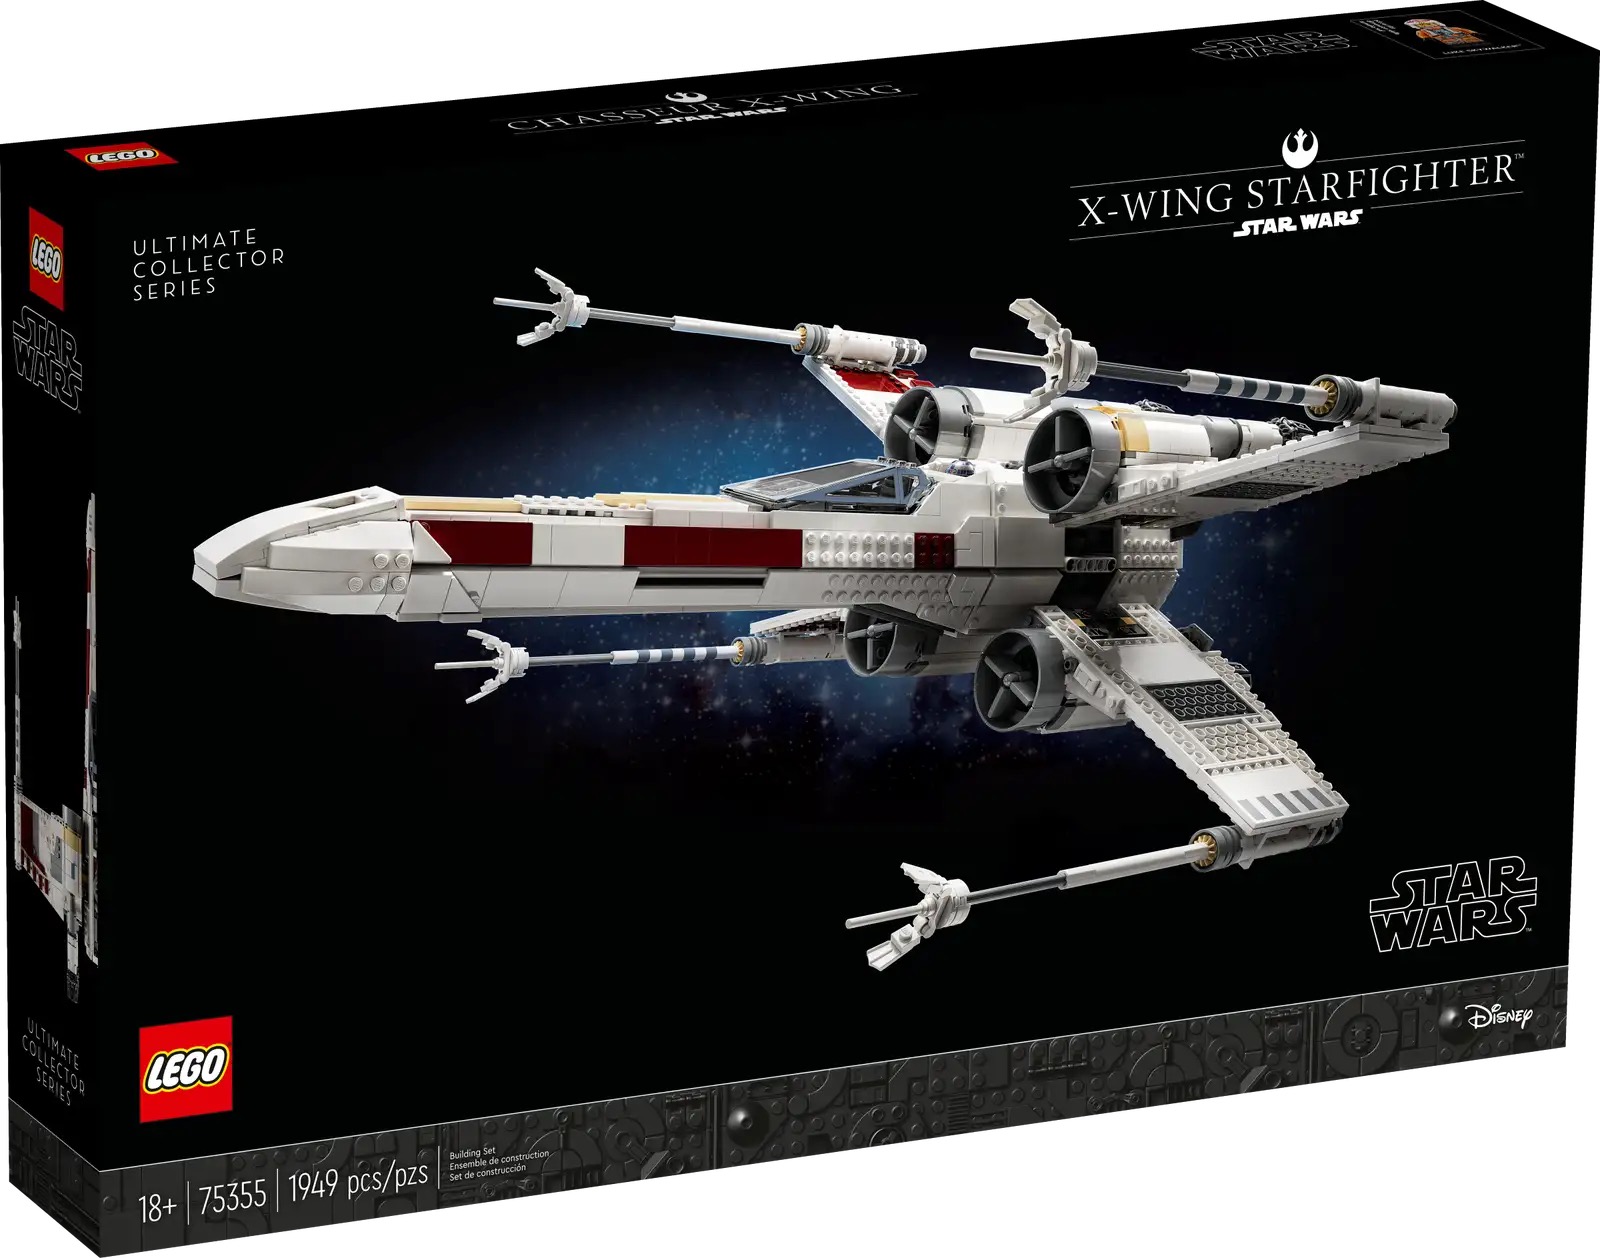 The LEGO X-Wing Starfighter box